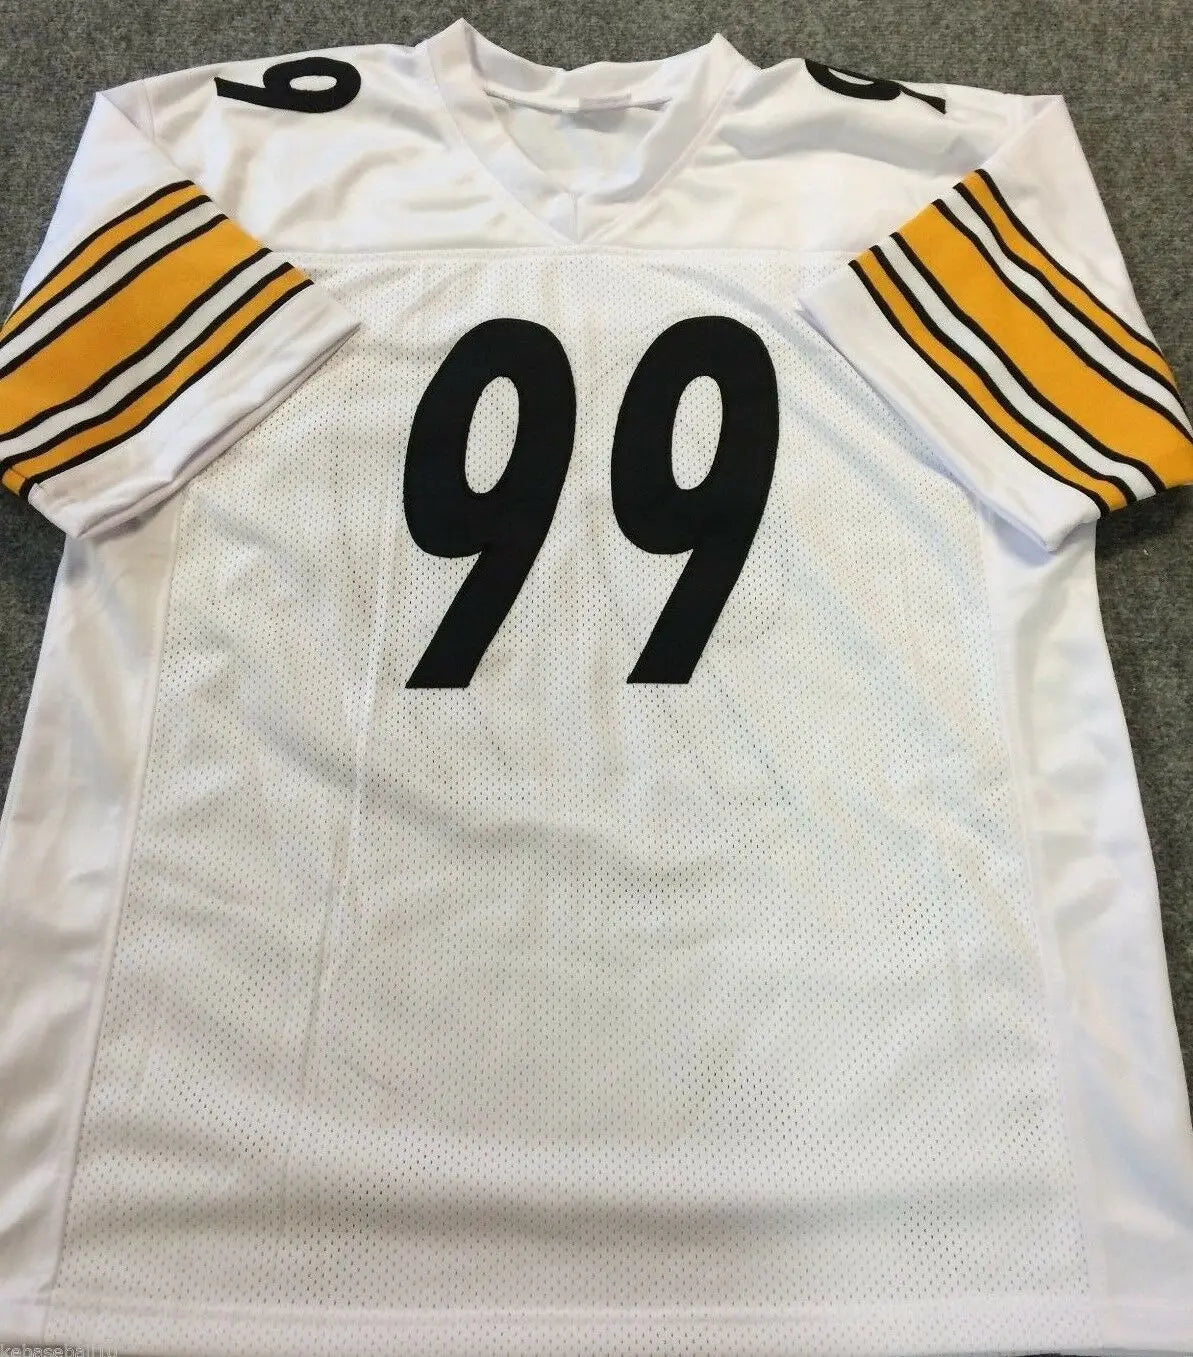 MVP Authentics Pittsburgh Steelers Brett Keisel Autographed Signed Jersey Jsa  Coa 125.10 sports jersey framing , jersey framing